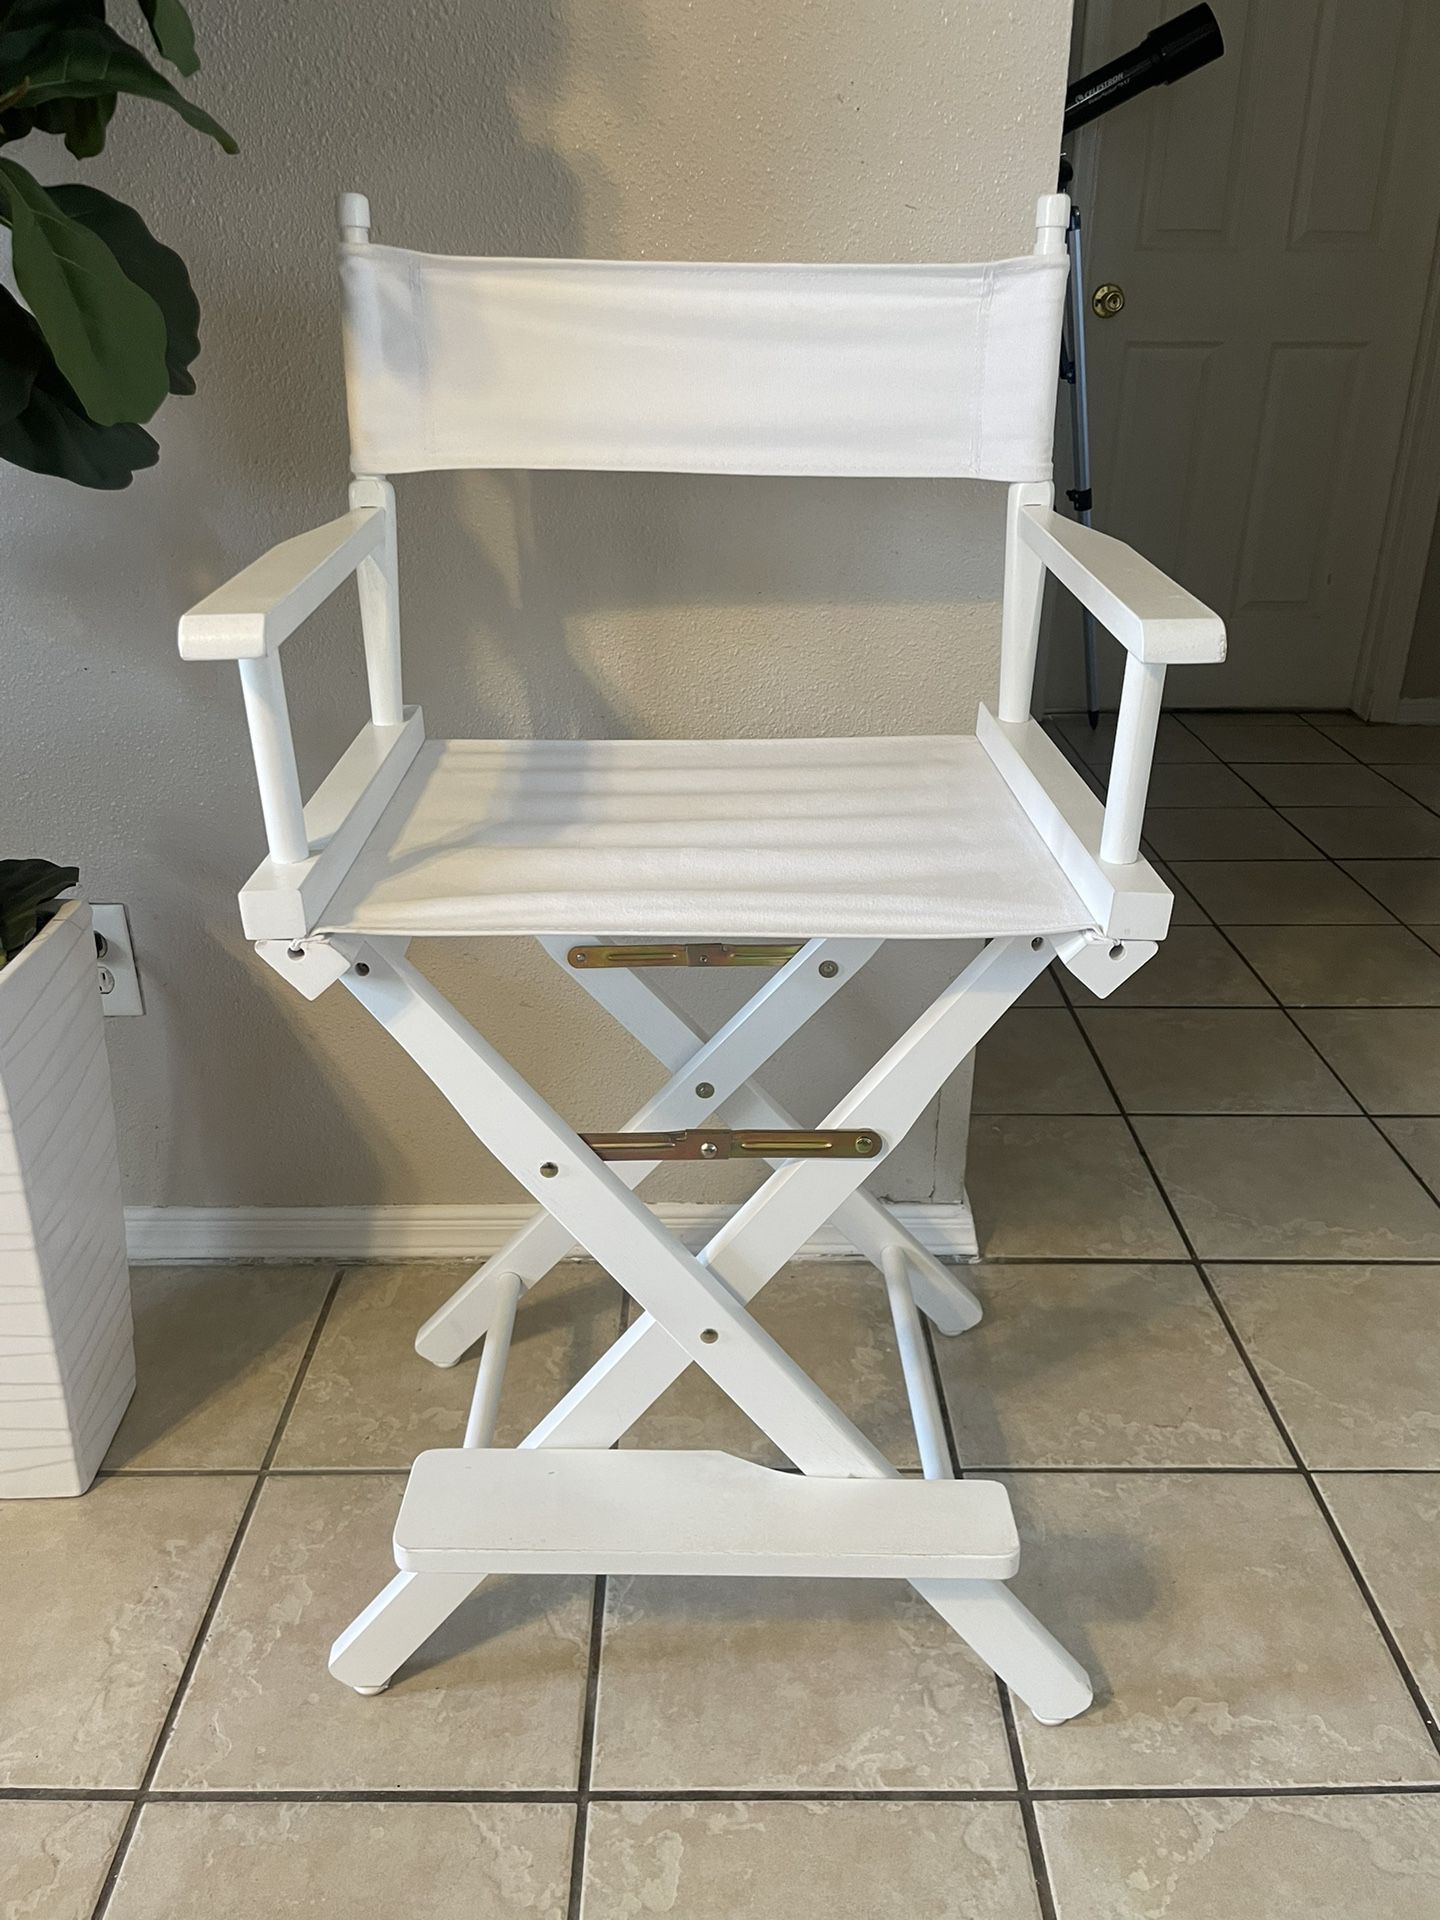 Tall Folding Chair (vanity, make up or decor chair)